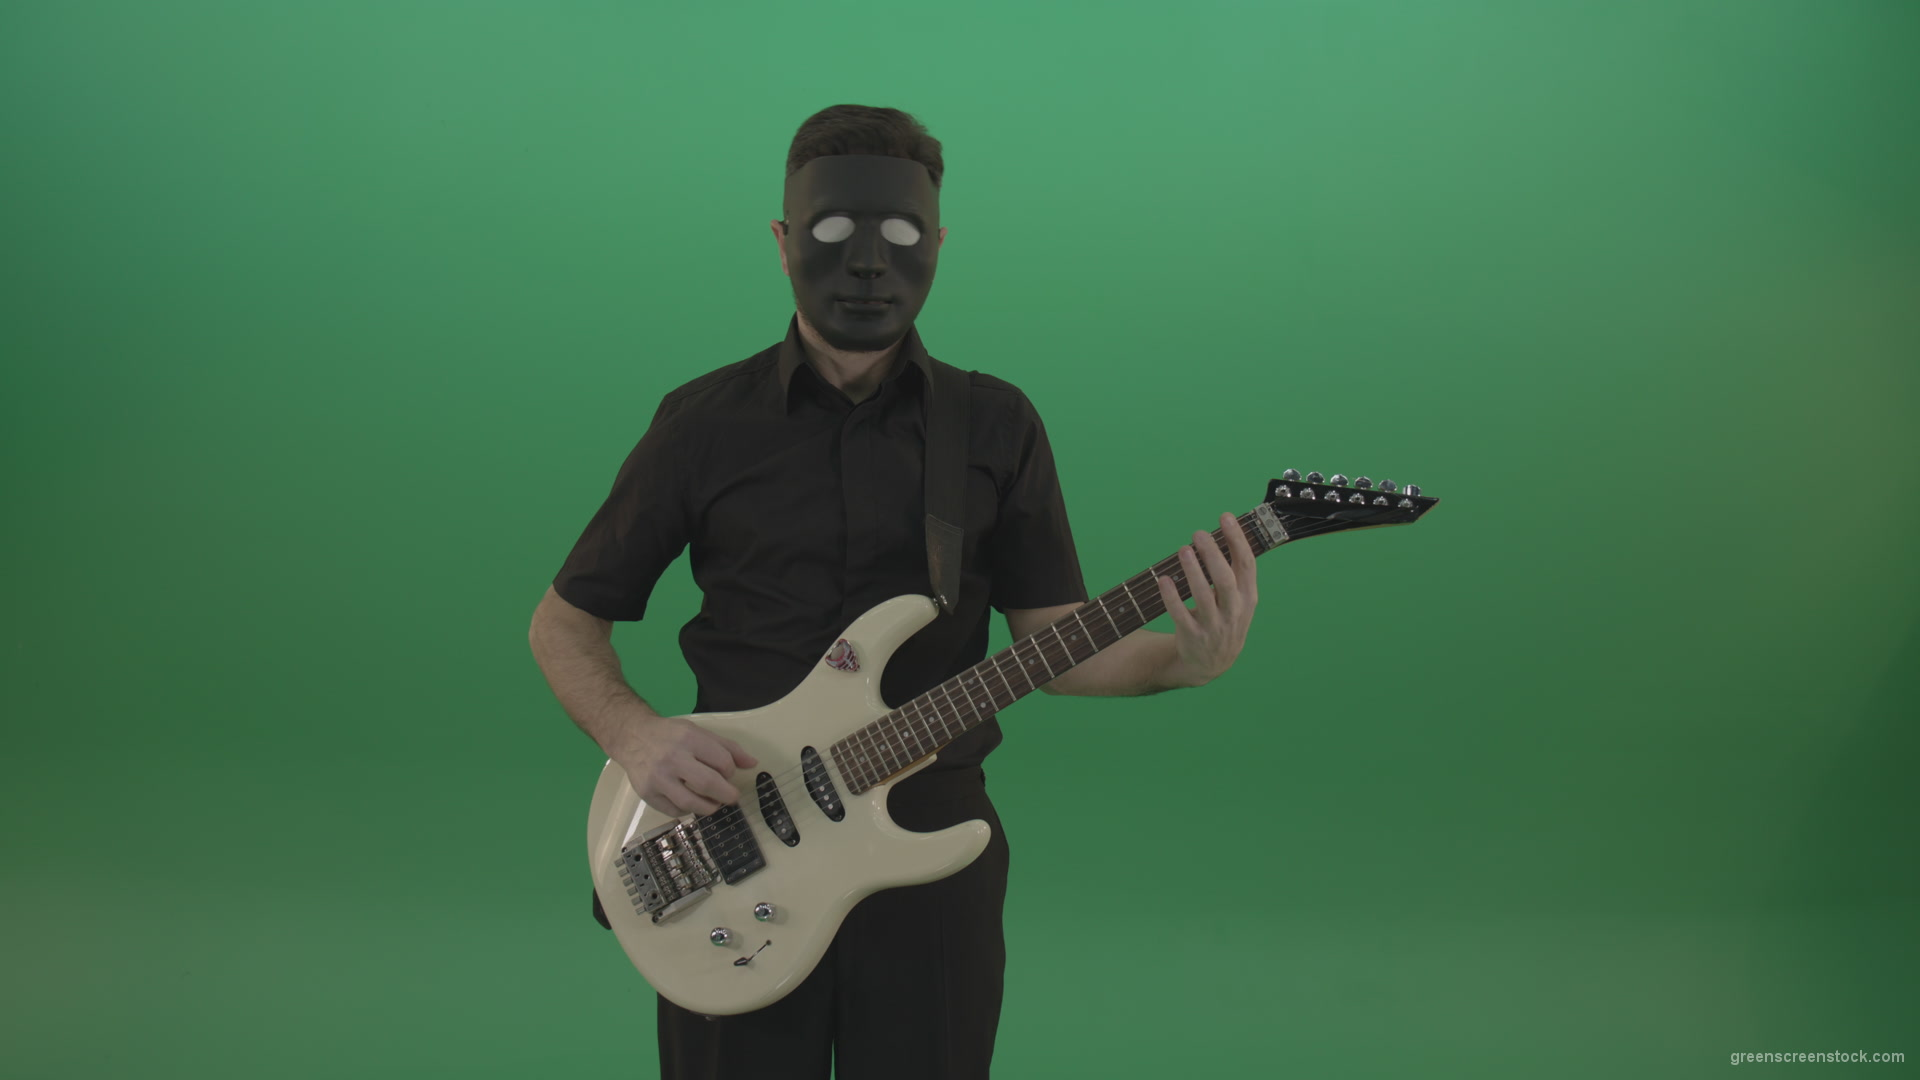 Hard-rock-guitarist-man-playing-white-guitar-in-black-mask-isolated-on-green-background_007 Green Screen Stock